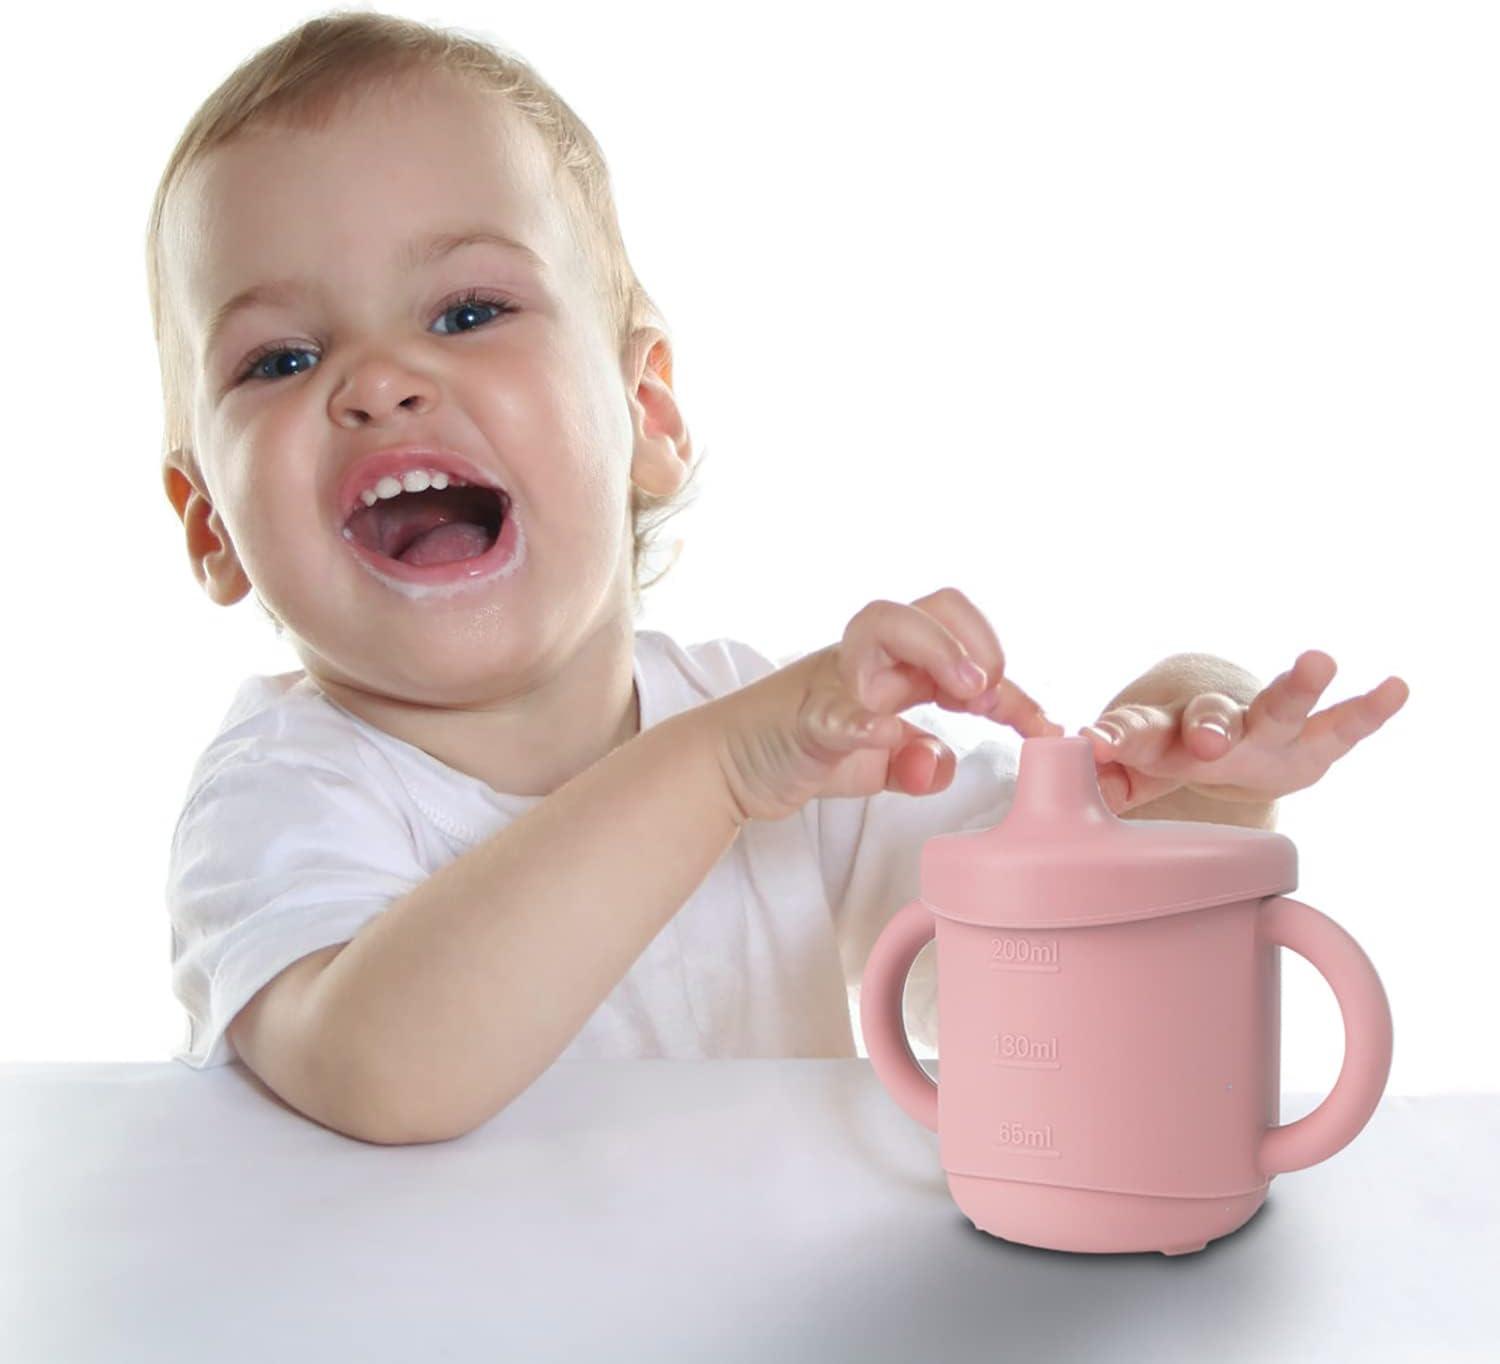 Prinper Silicone Baby Sippy Cup Feeding Straw Cups for Toddlers